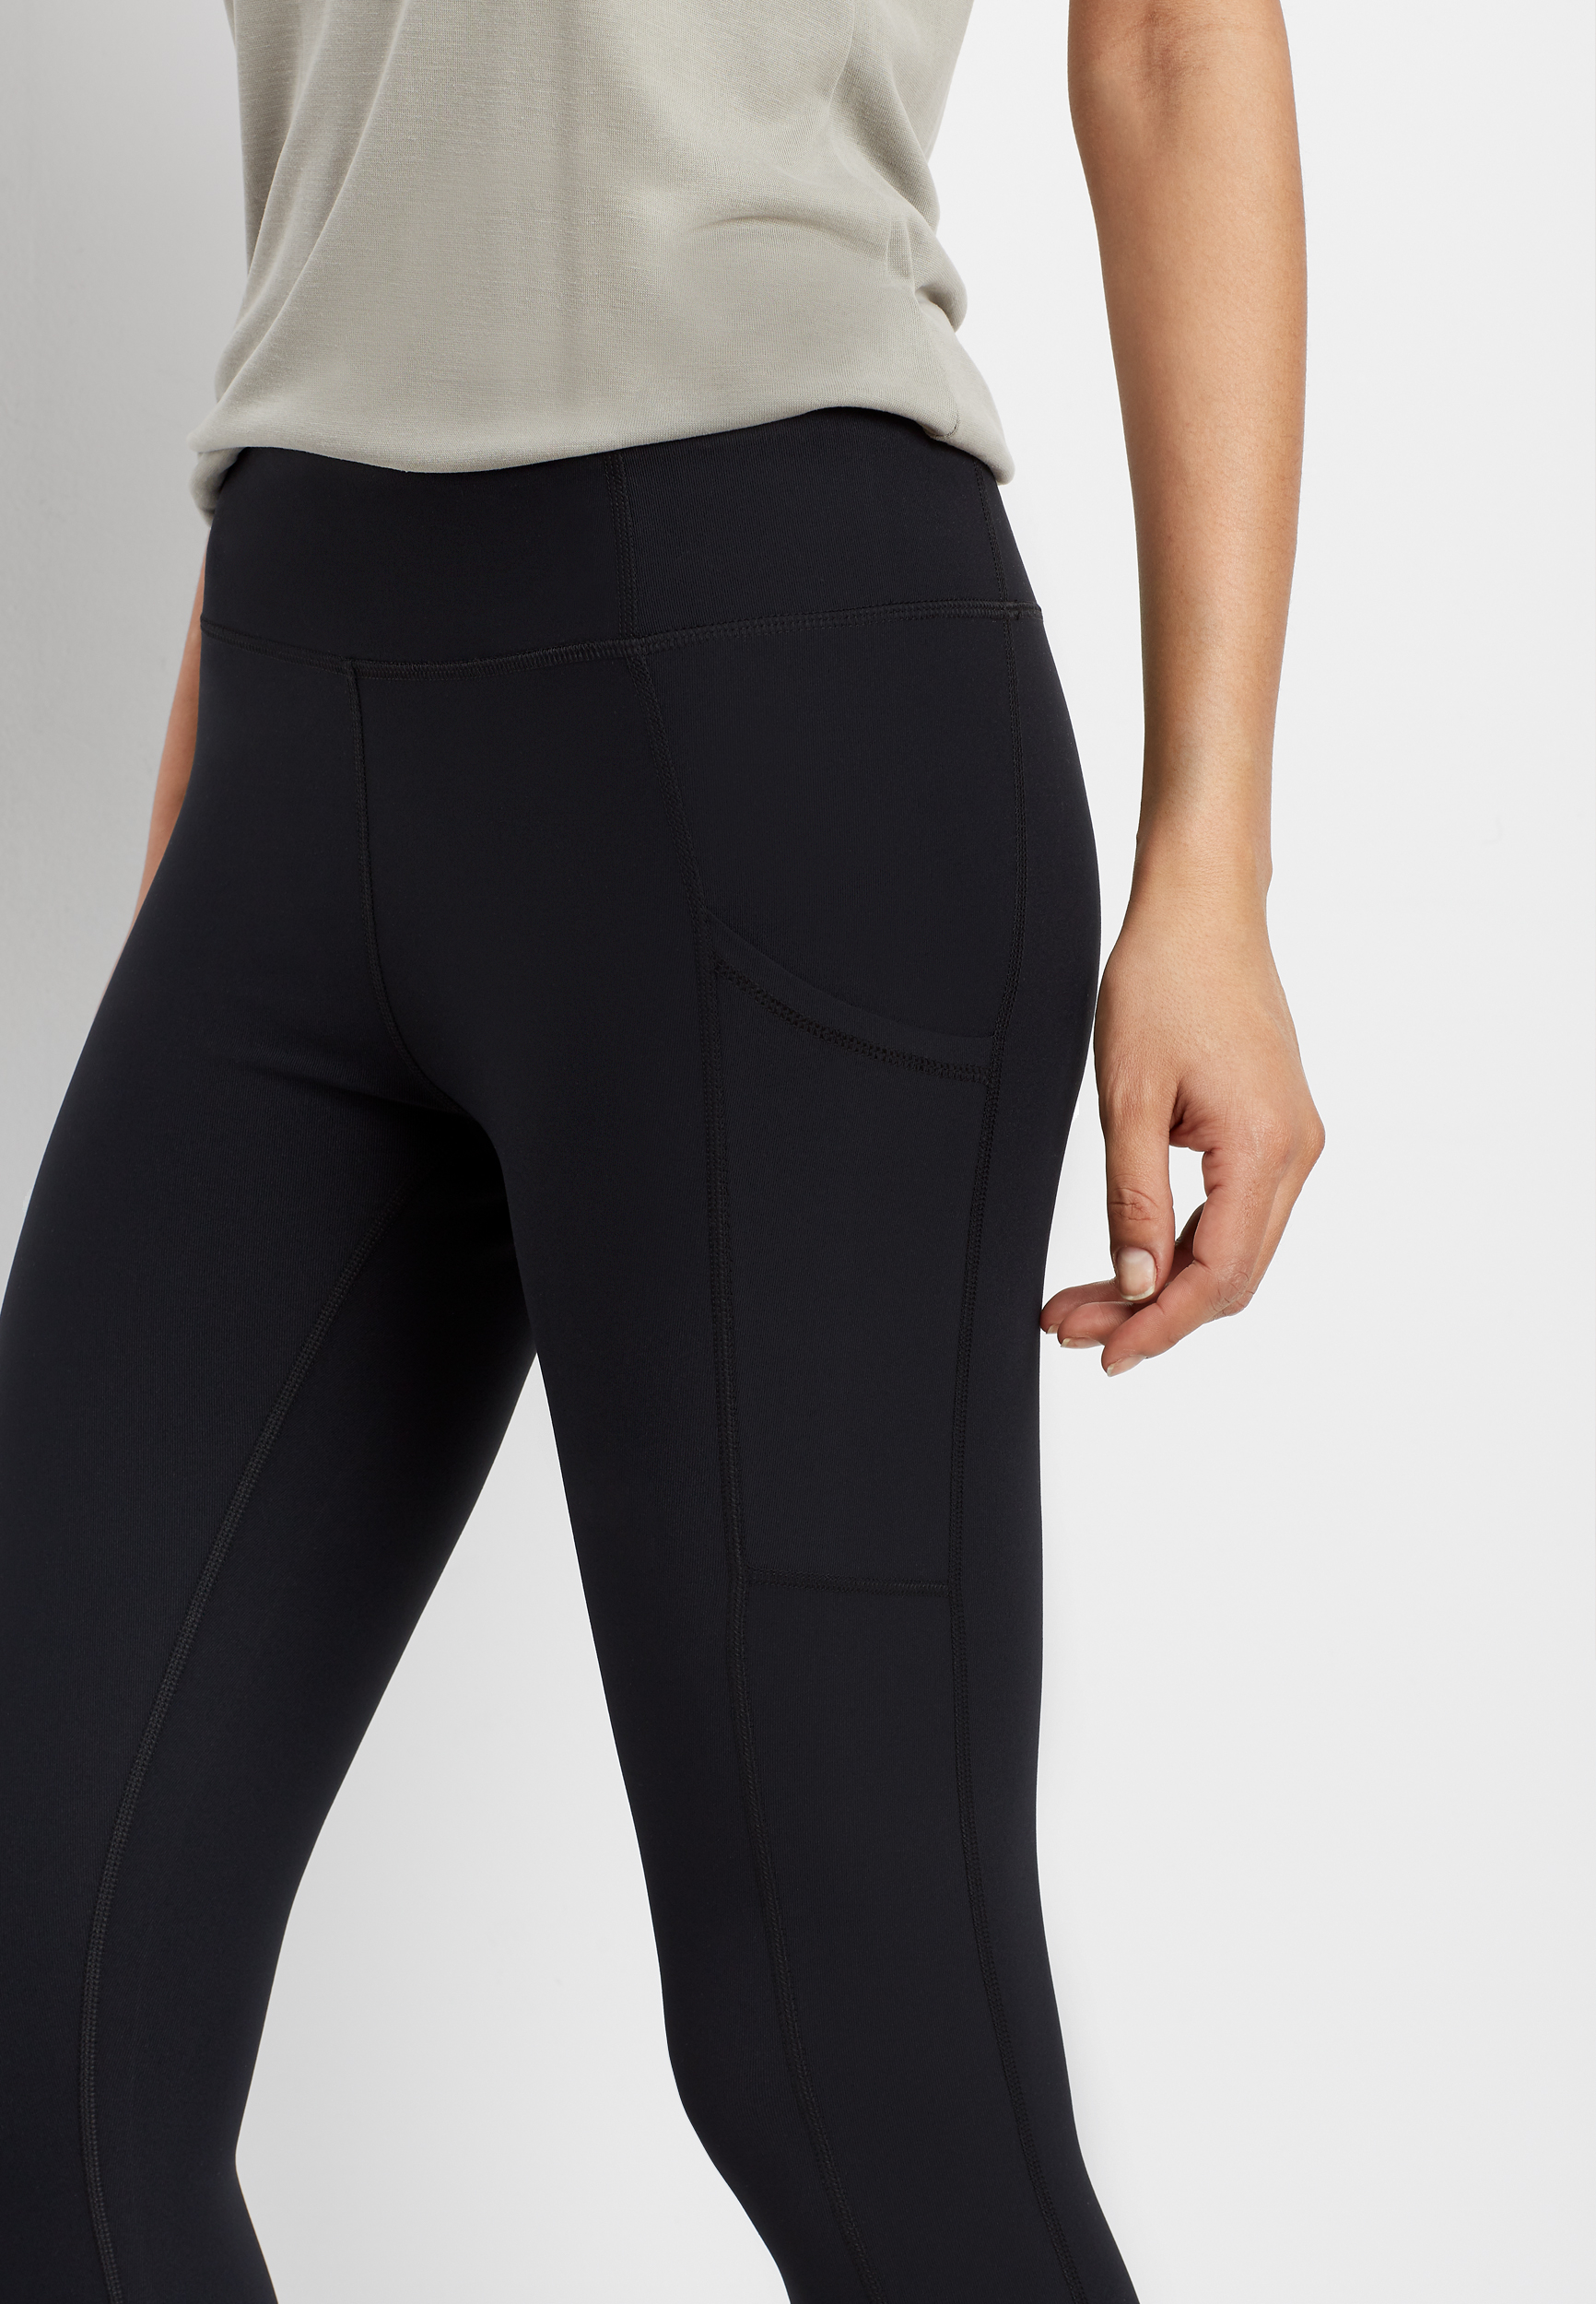 Leggings with Side Pocket (910AW)